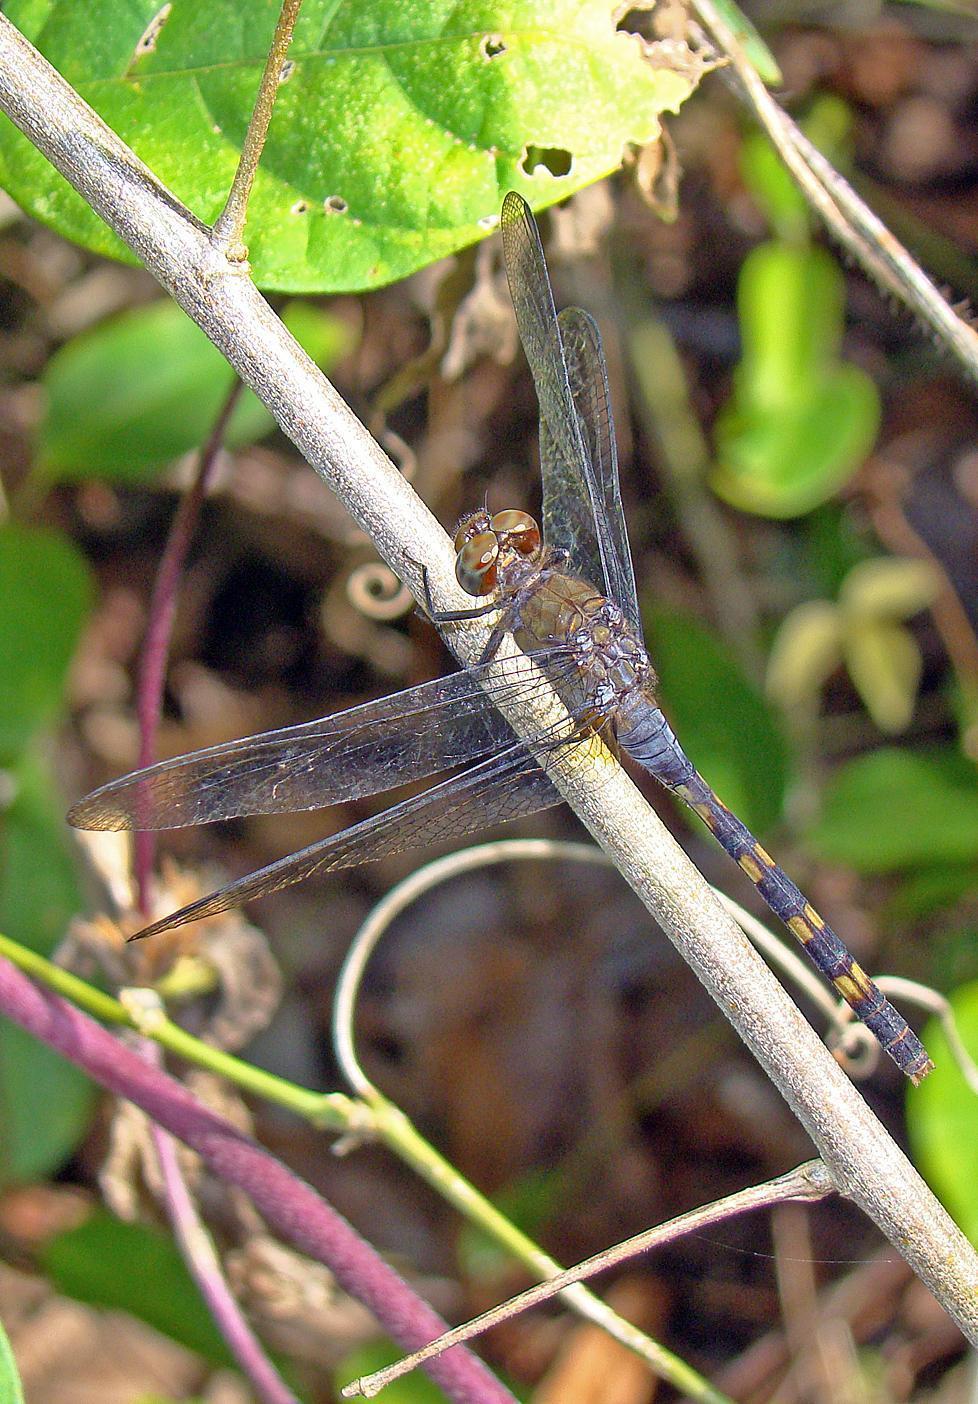 Band-winged Dragonlet Photo by Robert Behrstock